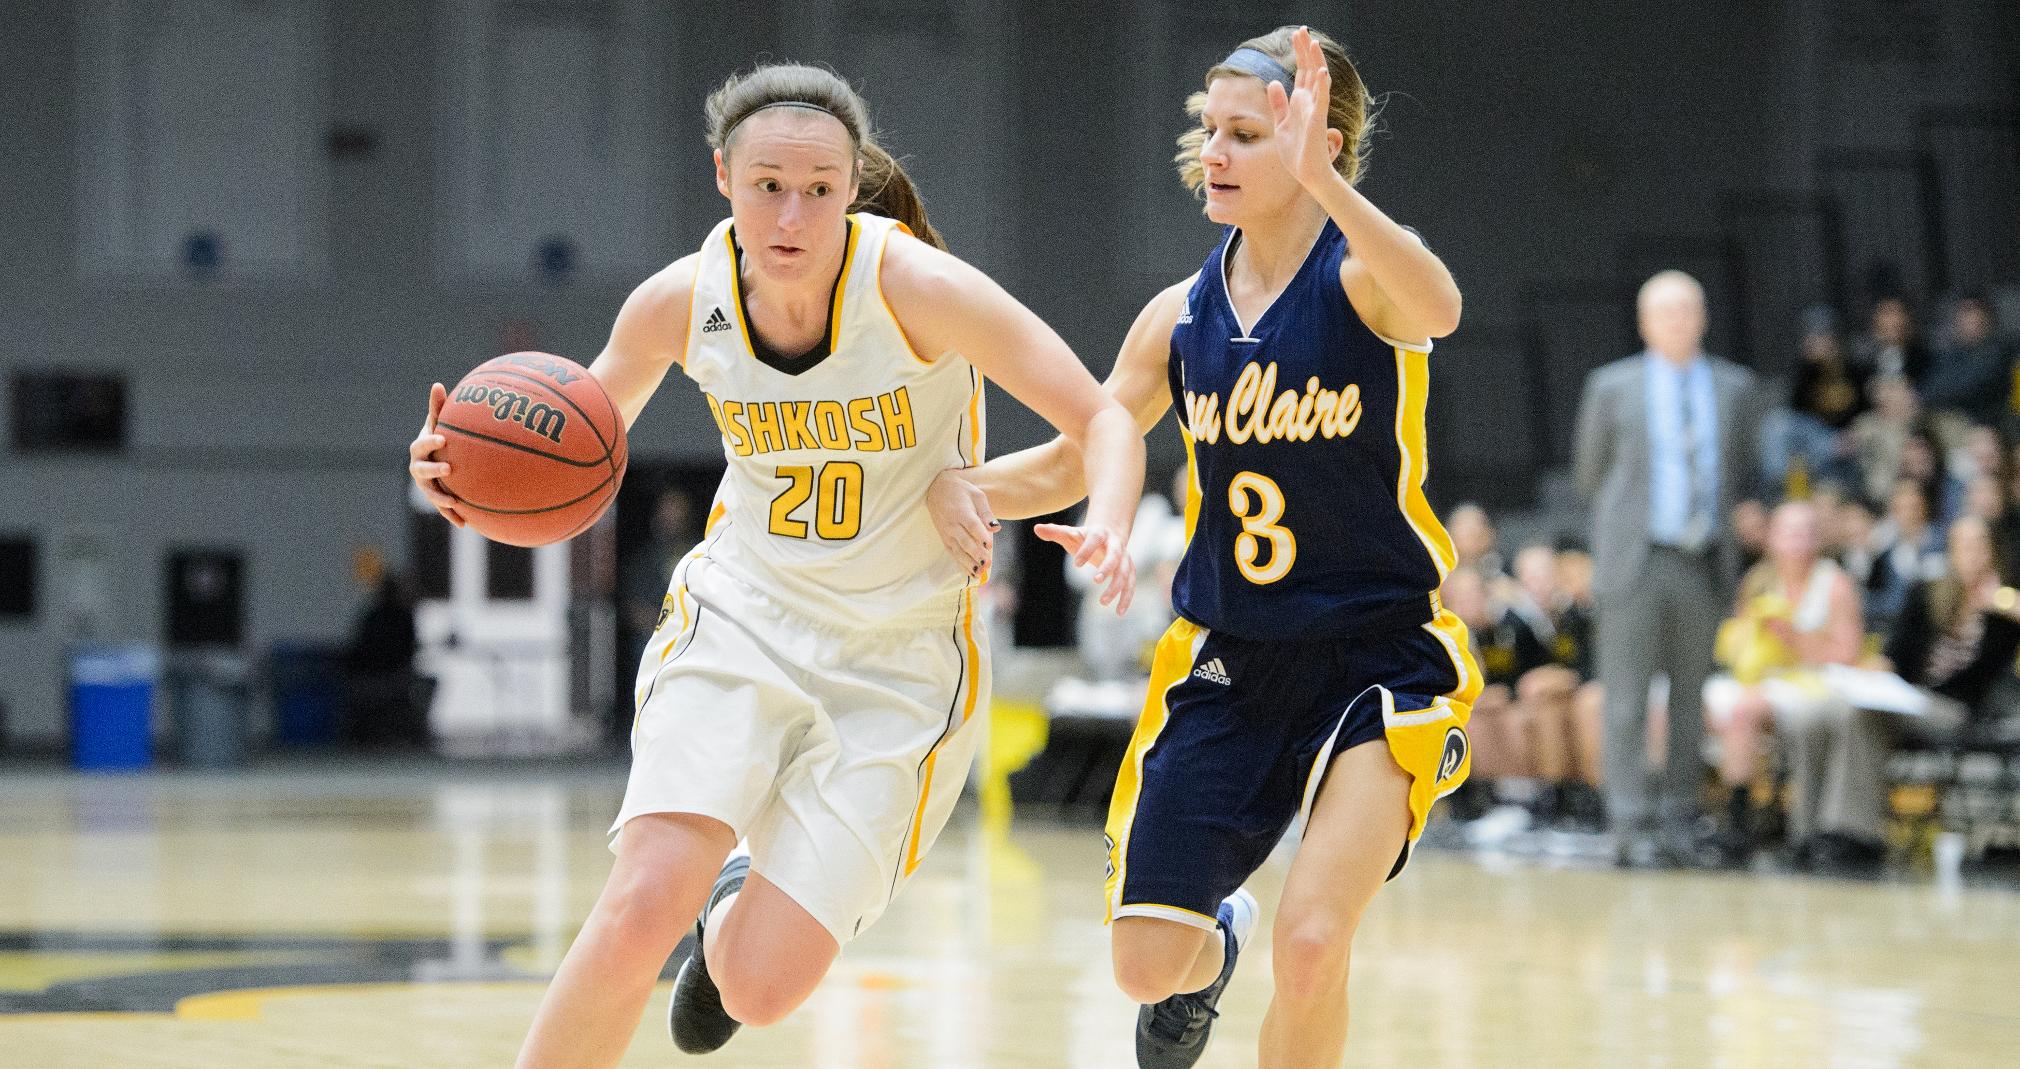 Ashley Neustifter totaled eight points, five rebounds and two assists to help the Titans defeat the Blugolds for the second time in two weeks.